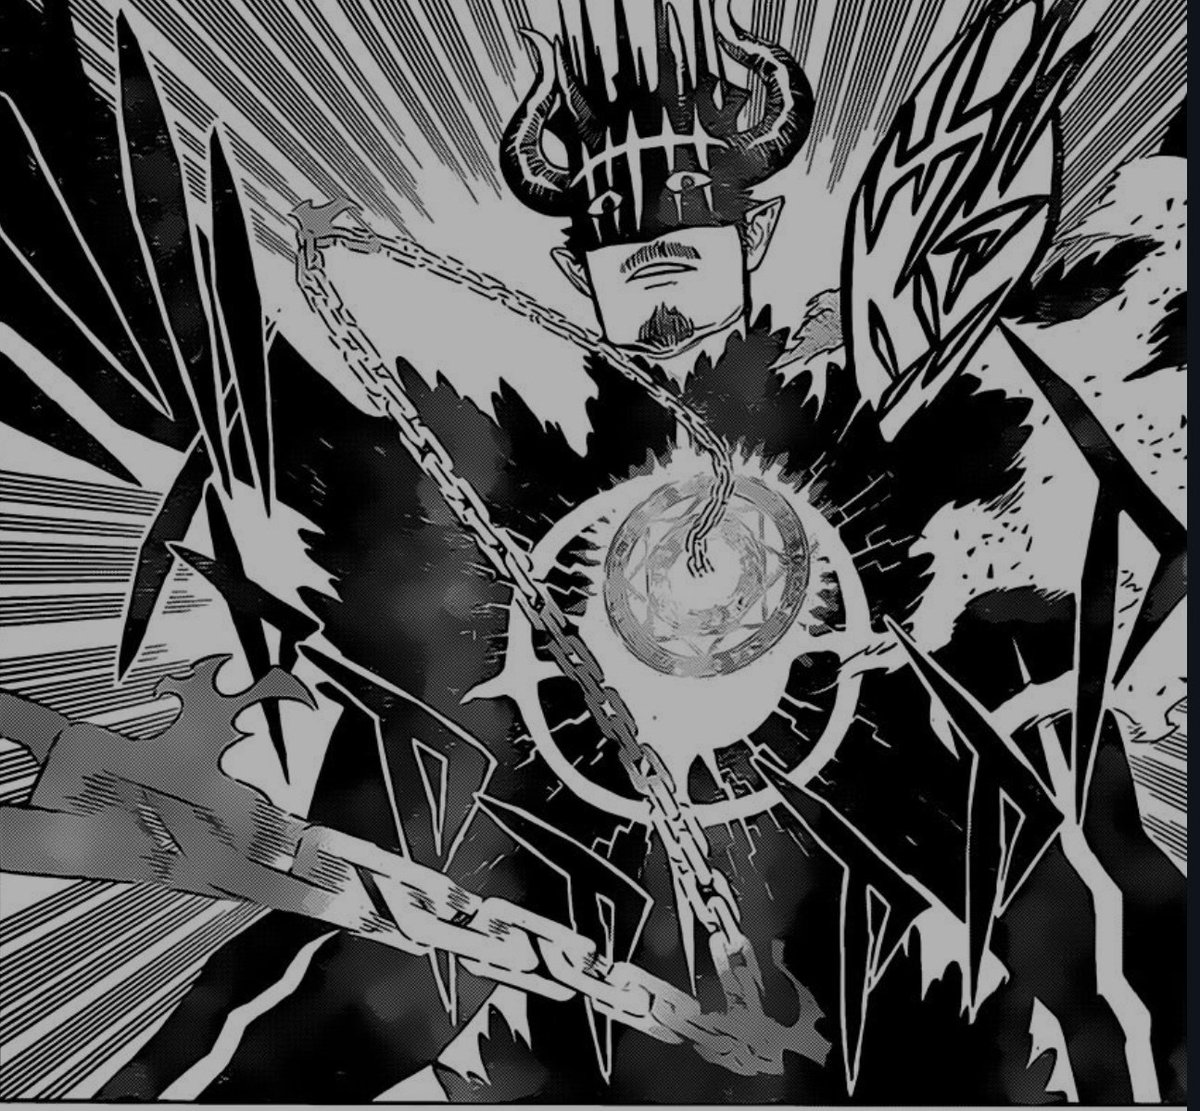 And what I personally love about Black Clover, is how Tabata is building smt similar imo. Not only are there countless ref. to various mythologies and religions, but Magna just gained a power neg to cause equilibrium between his opponent's power and his own.